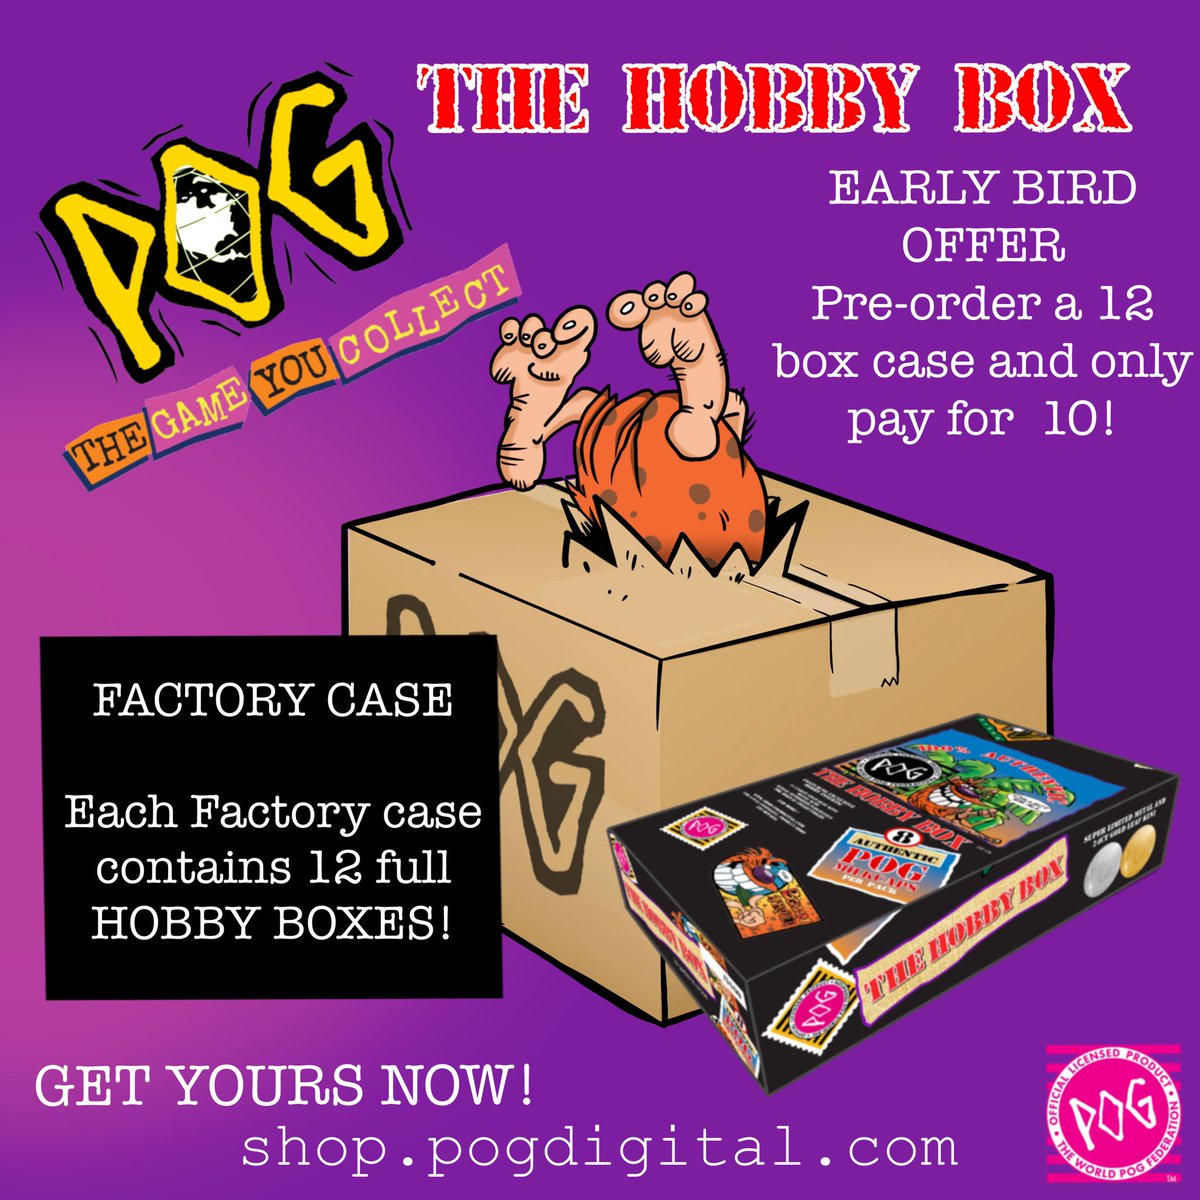 you asked. we answered. all you need to know about the POG Hobby Box. Now it’s our turn: have you ordered yours yet? #pog #collectors #poghobbybox those who pre-order have an extra surprise coming their way!!! Let us know in comments.